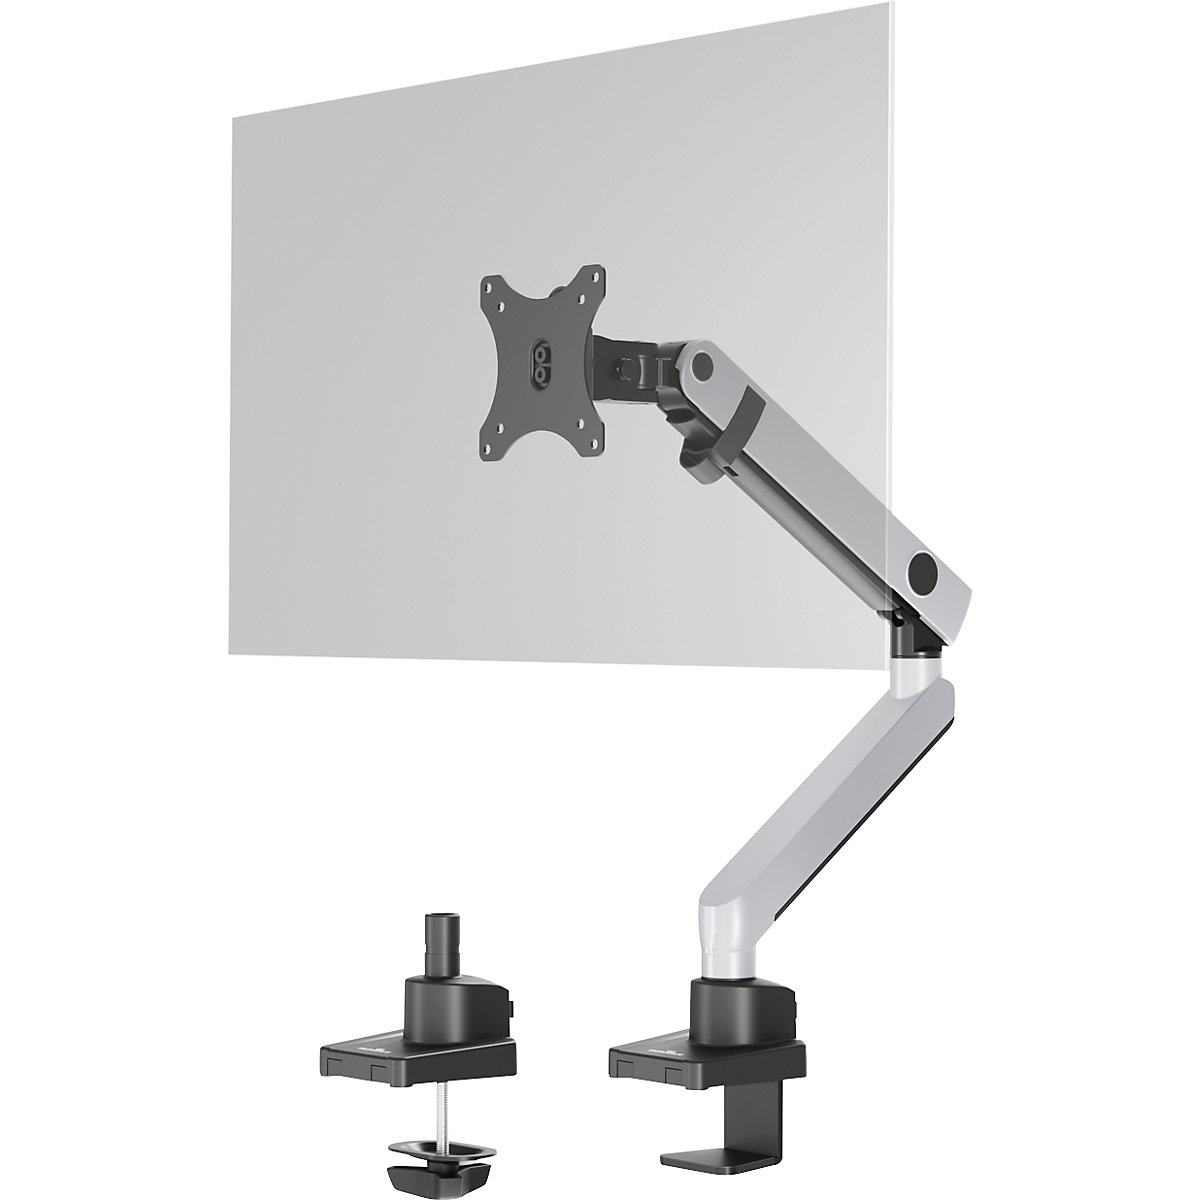 SELECT PLUS monitor holder - DURABLE